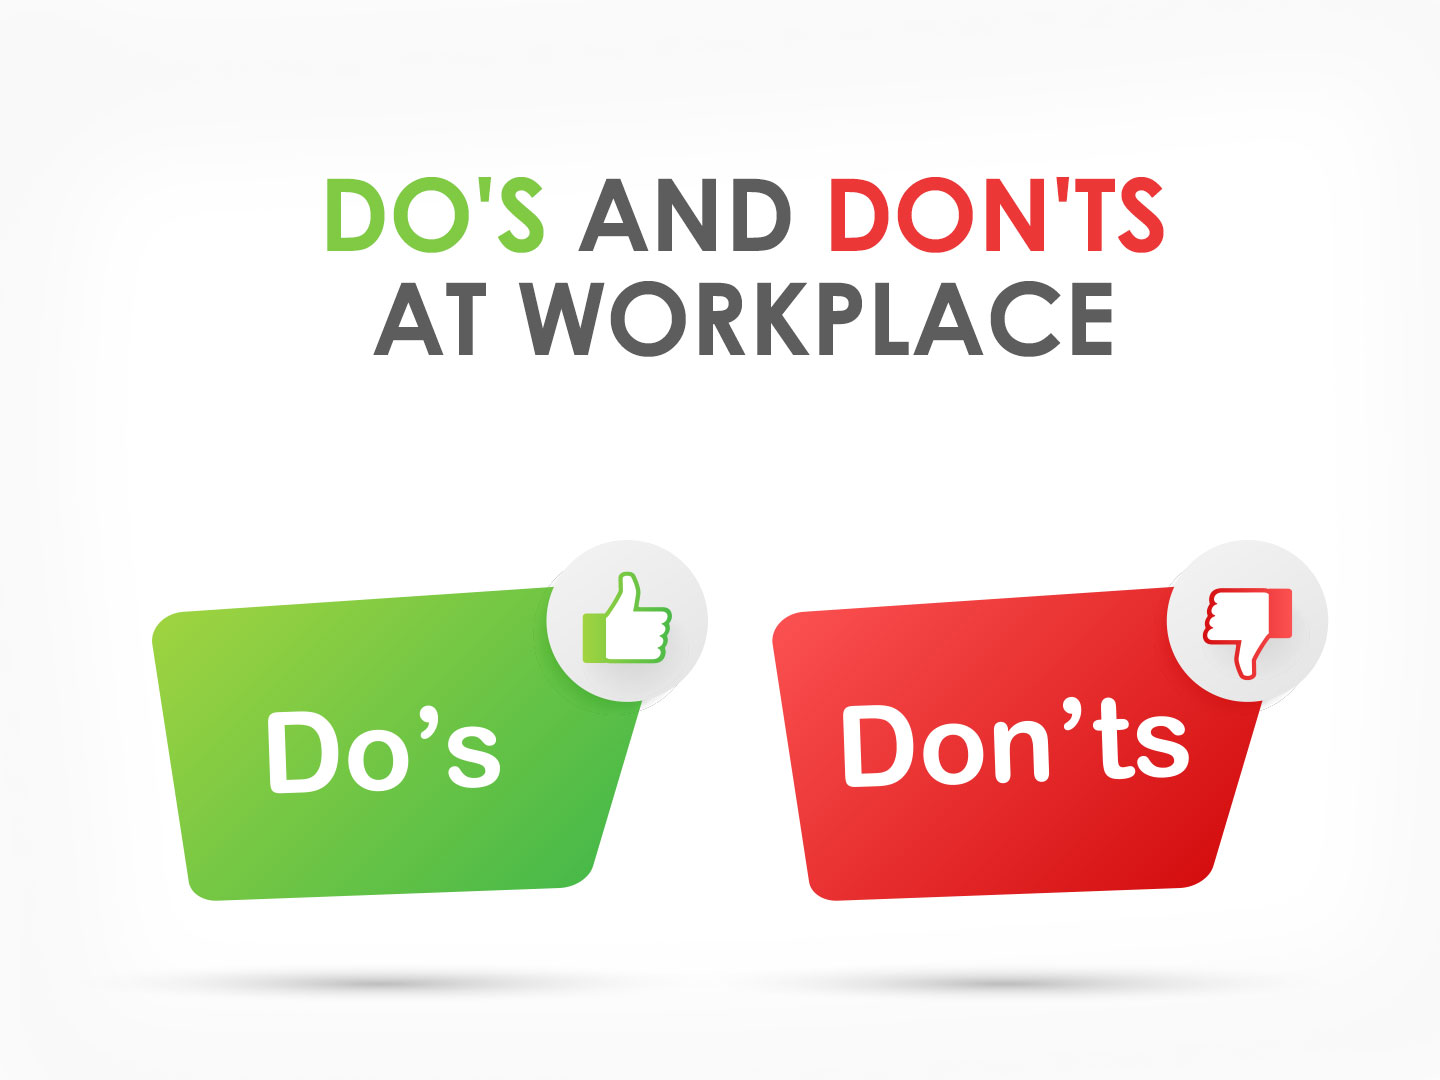 Top 4 Do's and Don'ts at Workplace